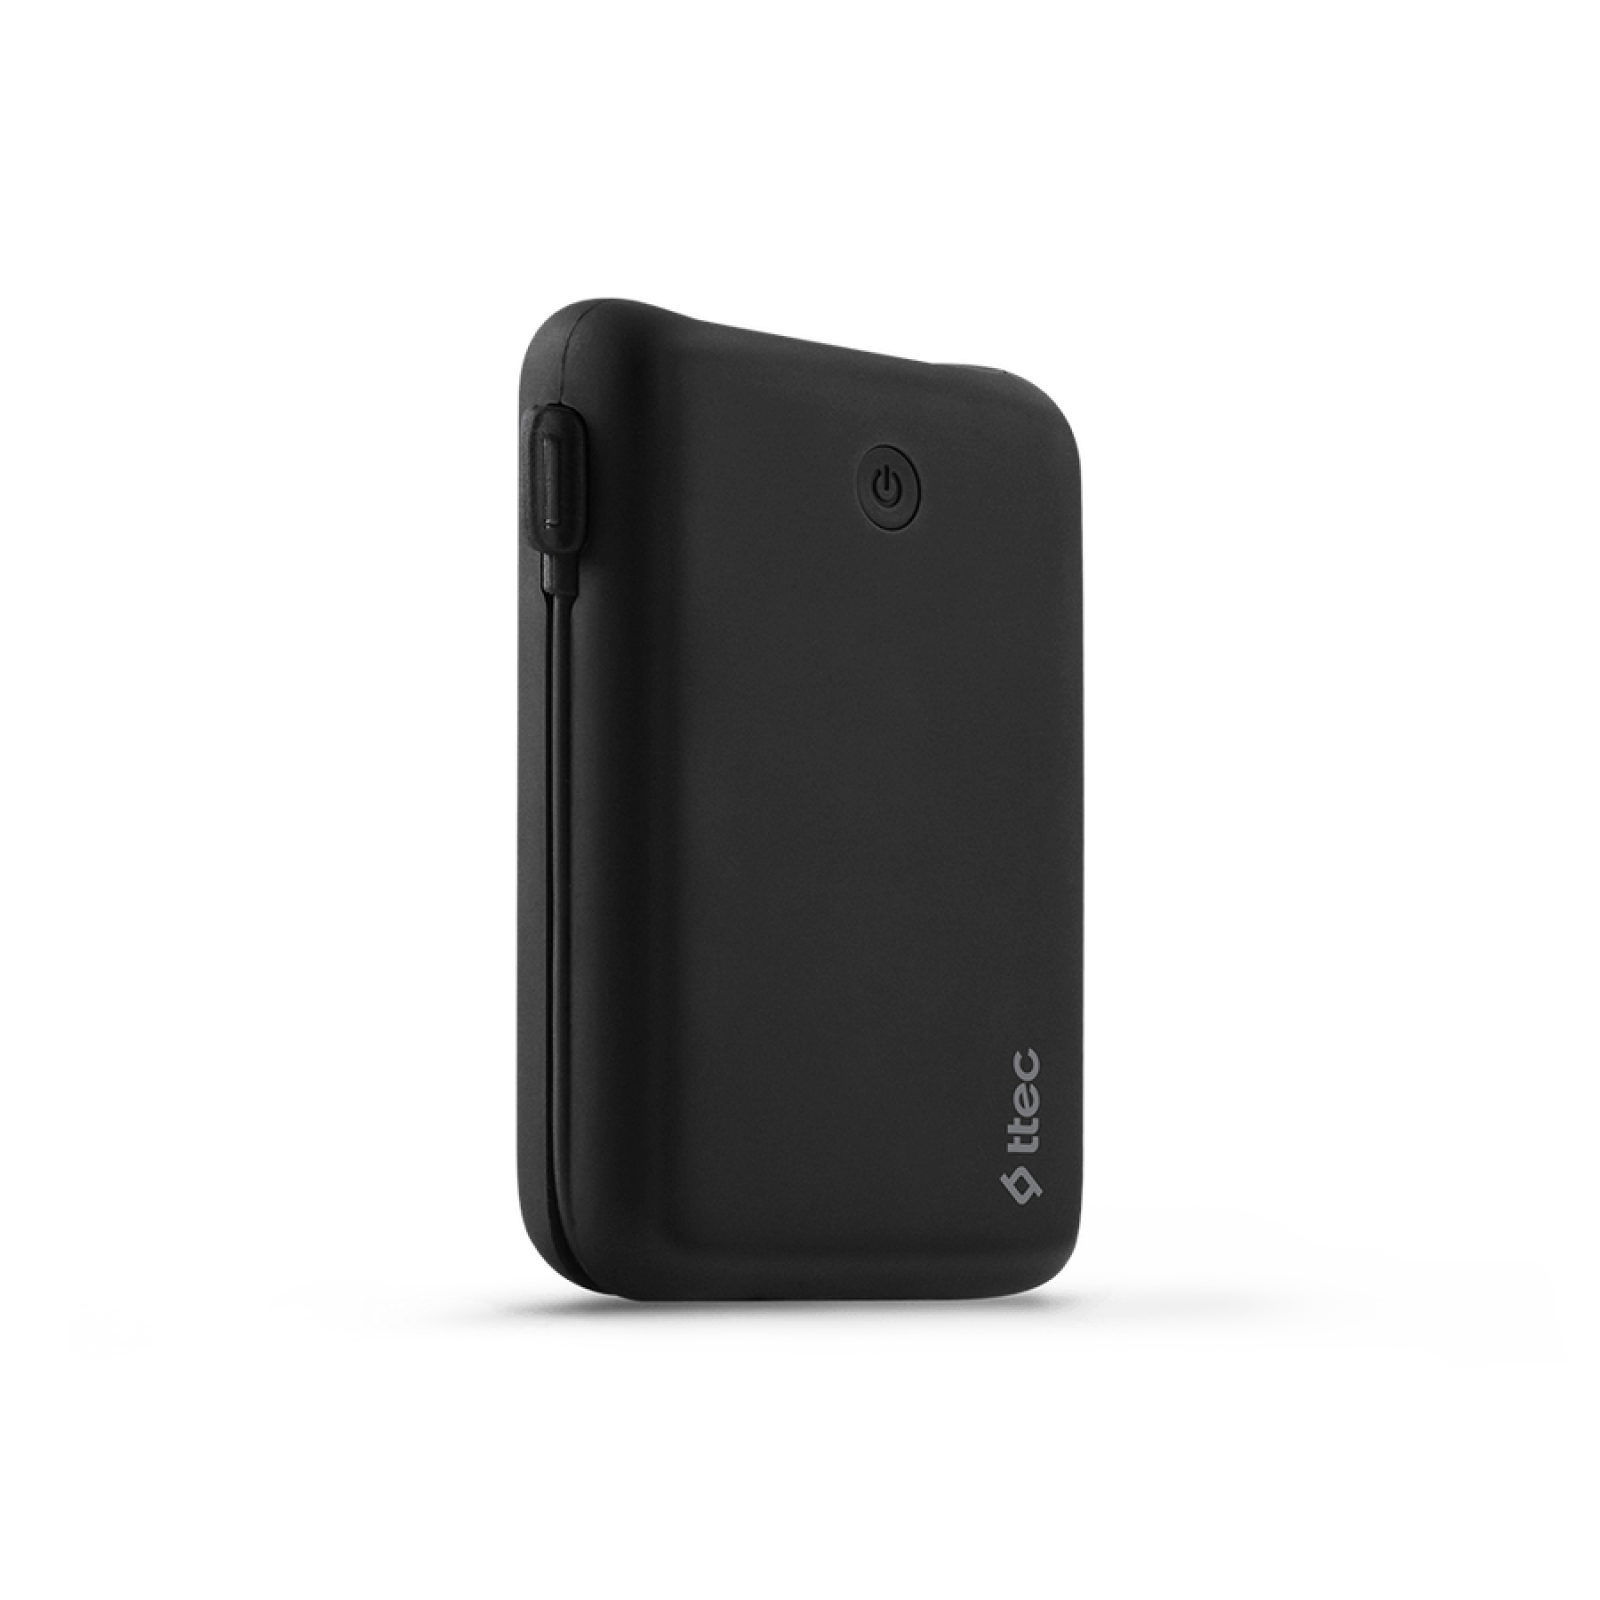 Външна батерия ReCharger Duo+ 10.000mAh Built in Type-C Cable Universal Mobile Charger - Черна,116986